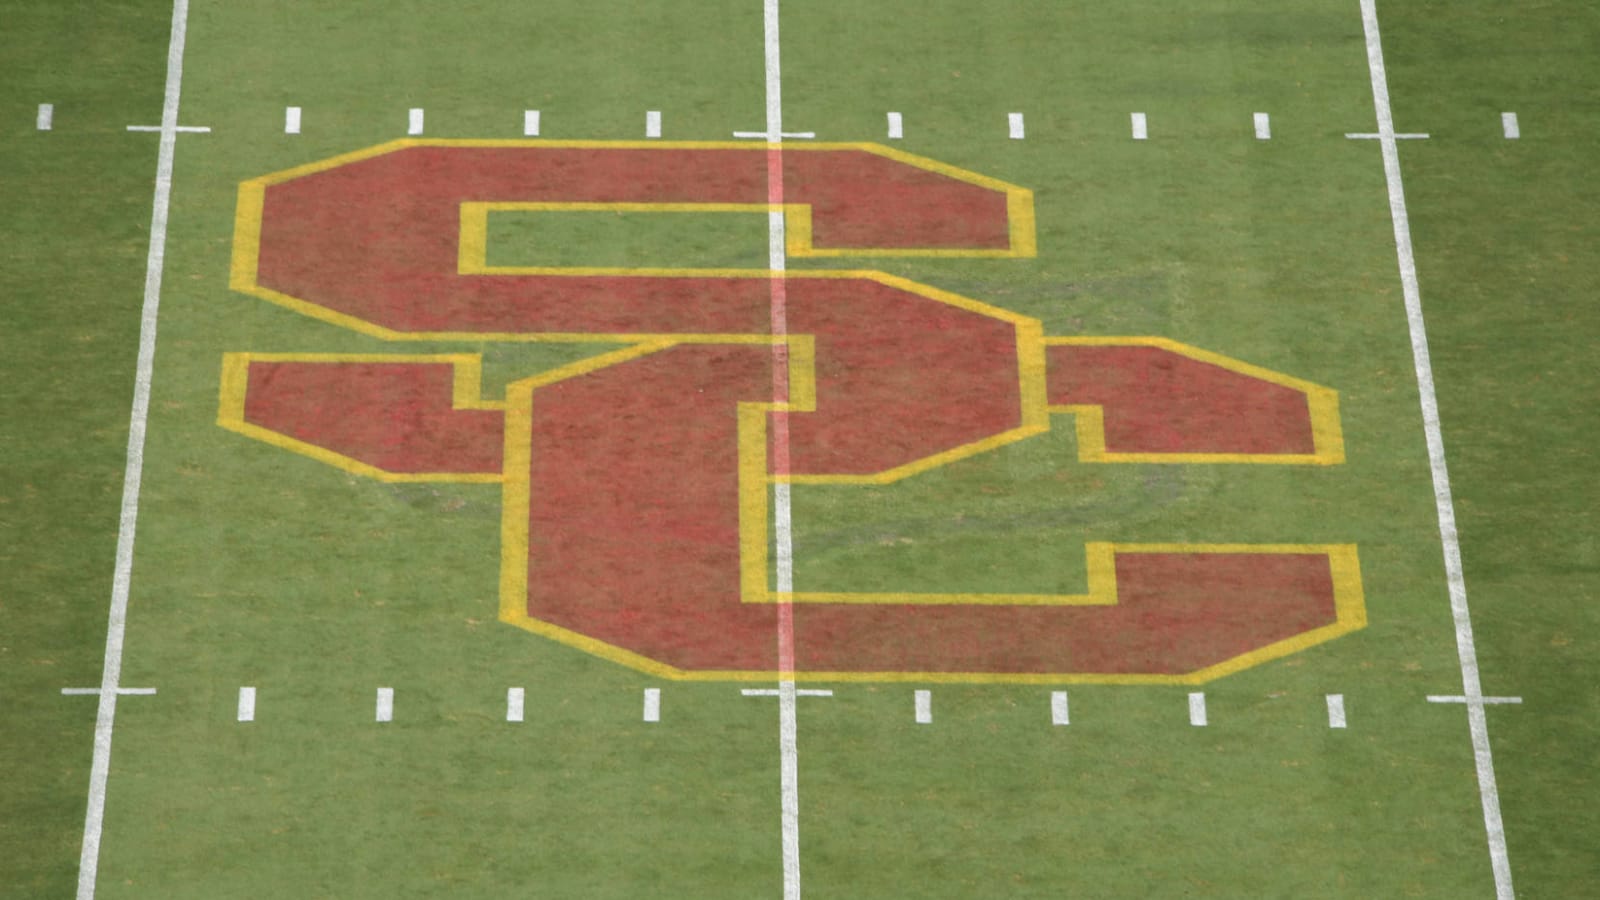 Homeless man participated in USC football practice